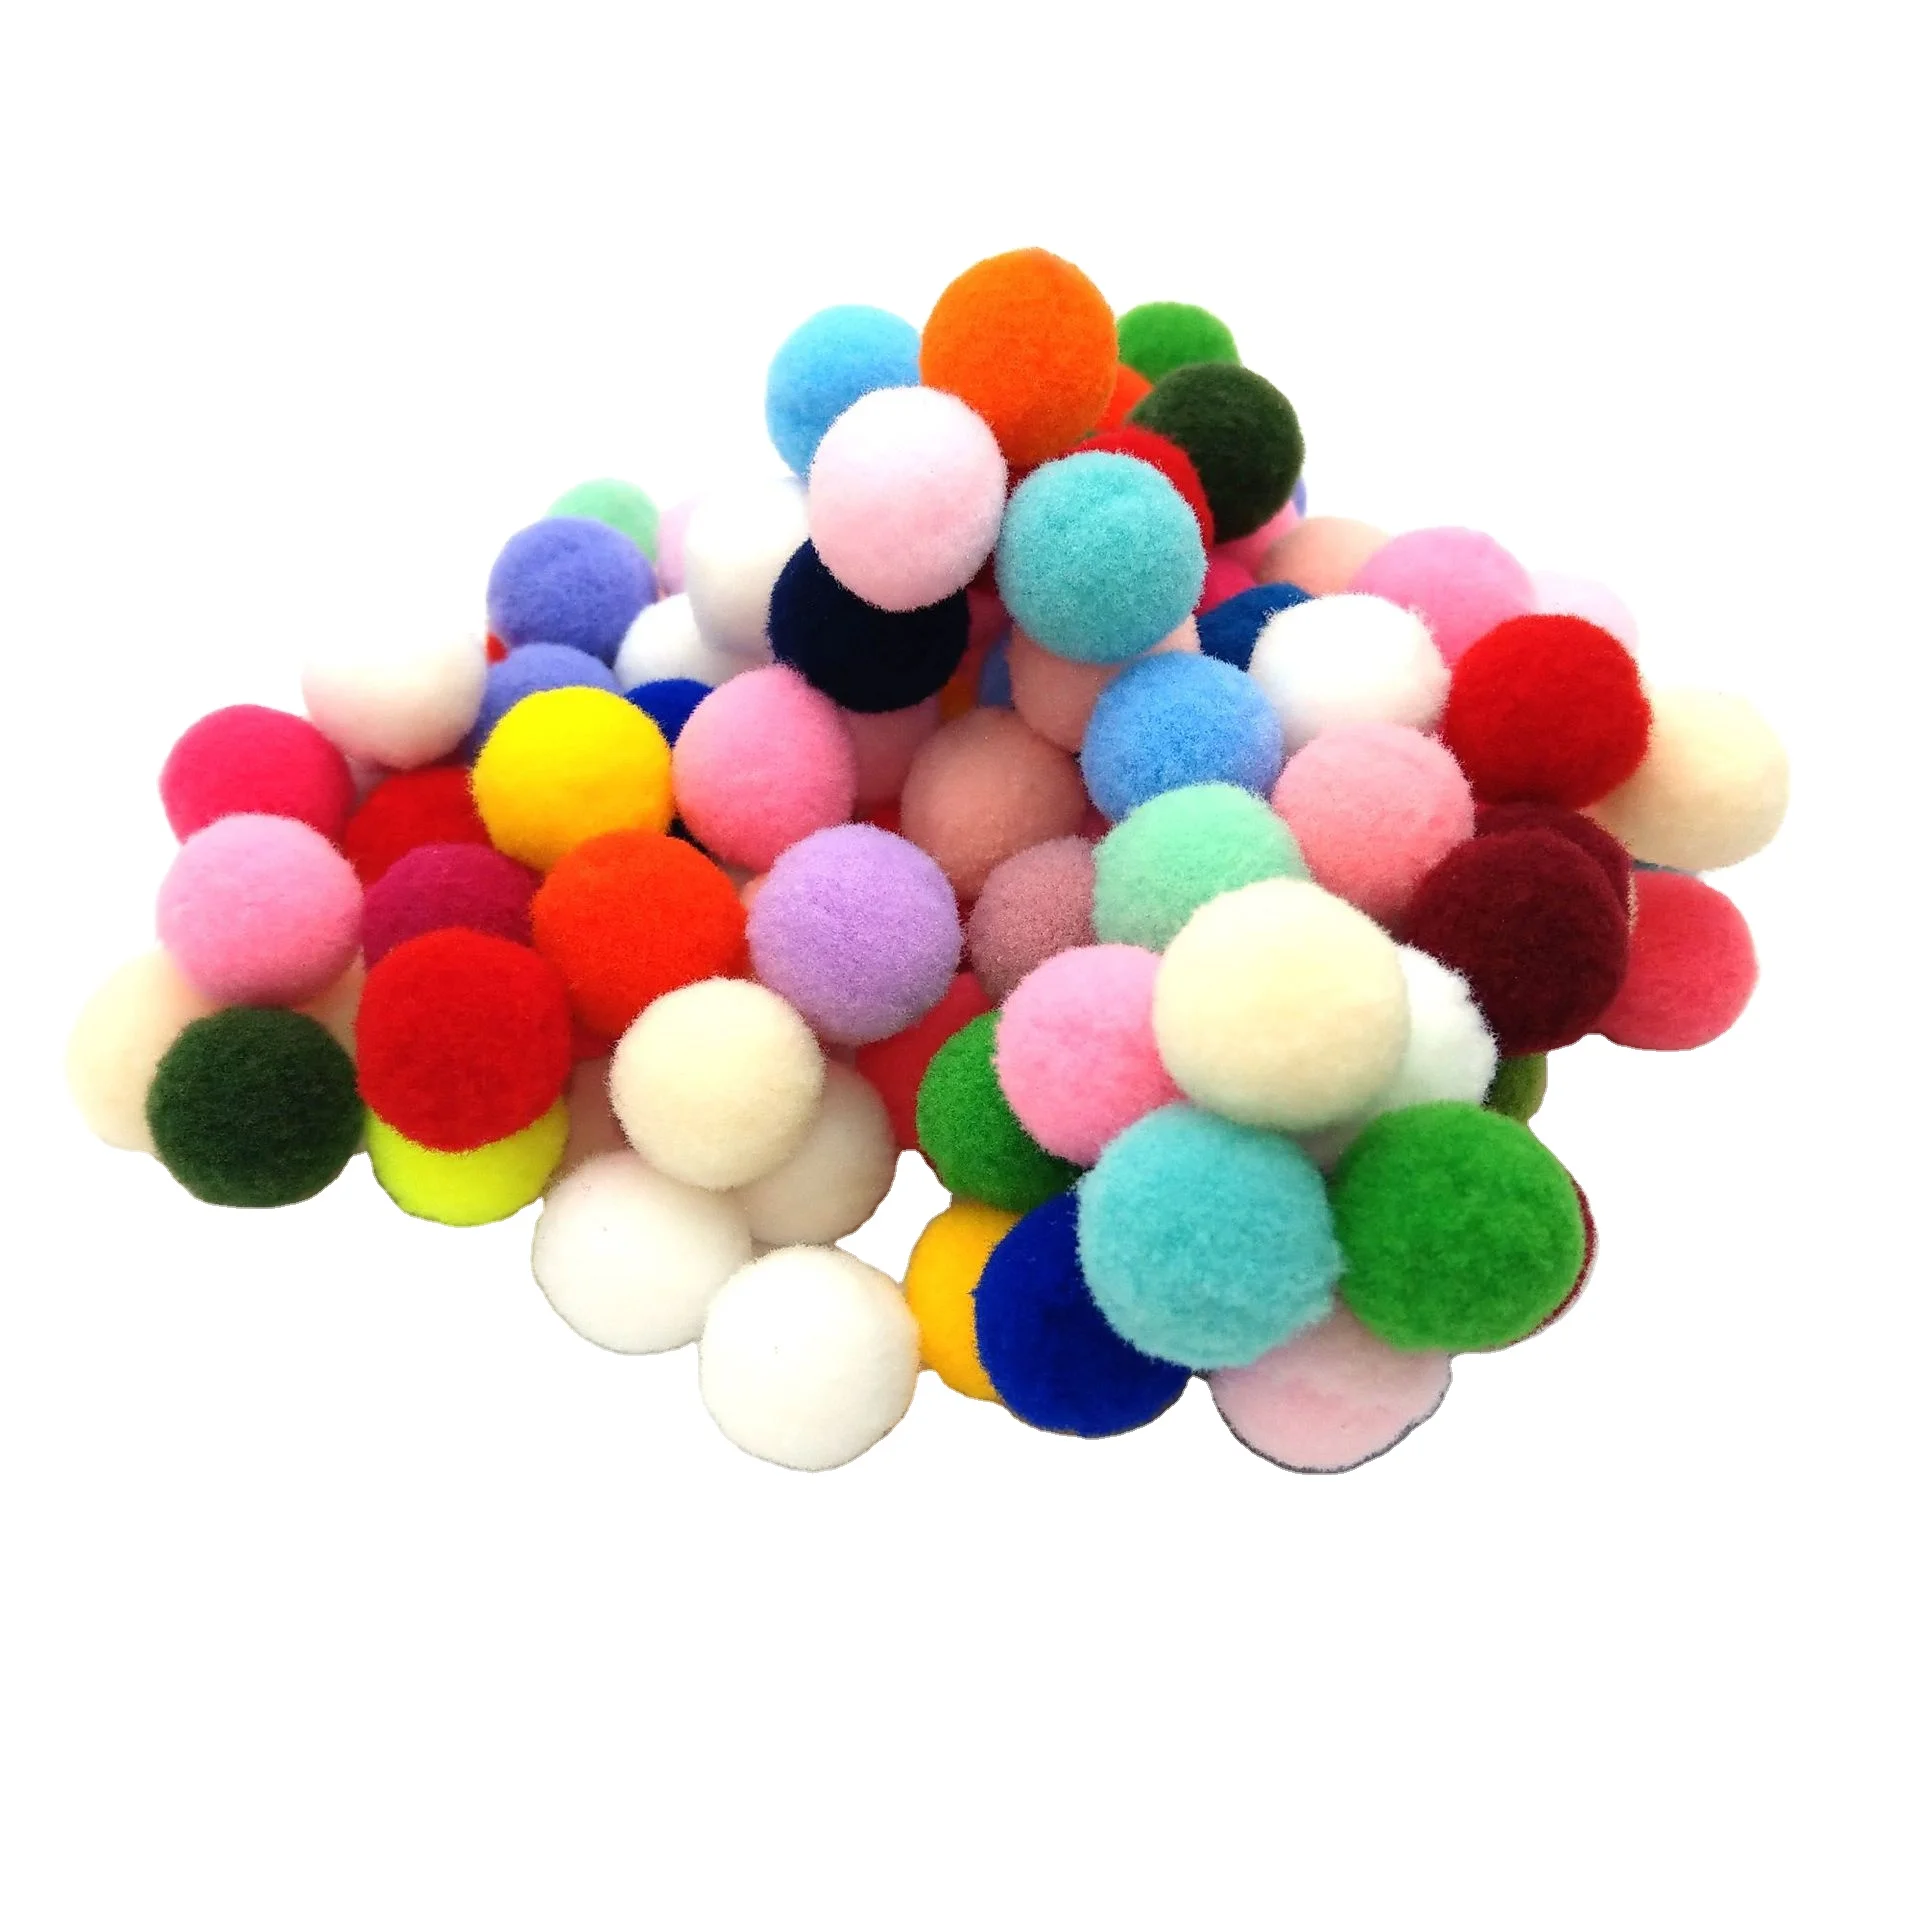 Assorted Pompoms Multicolor Arts And Crafts Fuzzy Pom Poms Balls For Diy Creative Decorations - Buy Pompom Ball,Decorative Balls For Plastic Craft Balls Product on Alibaba.com